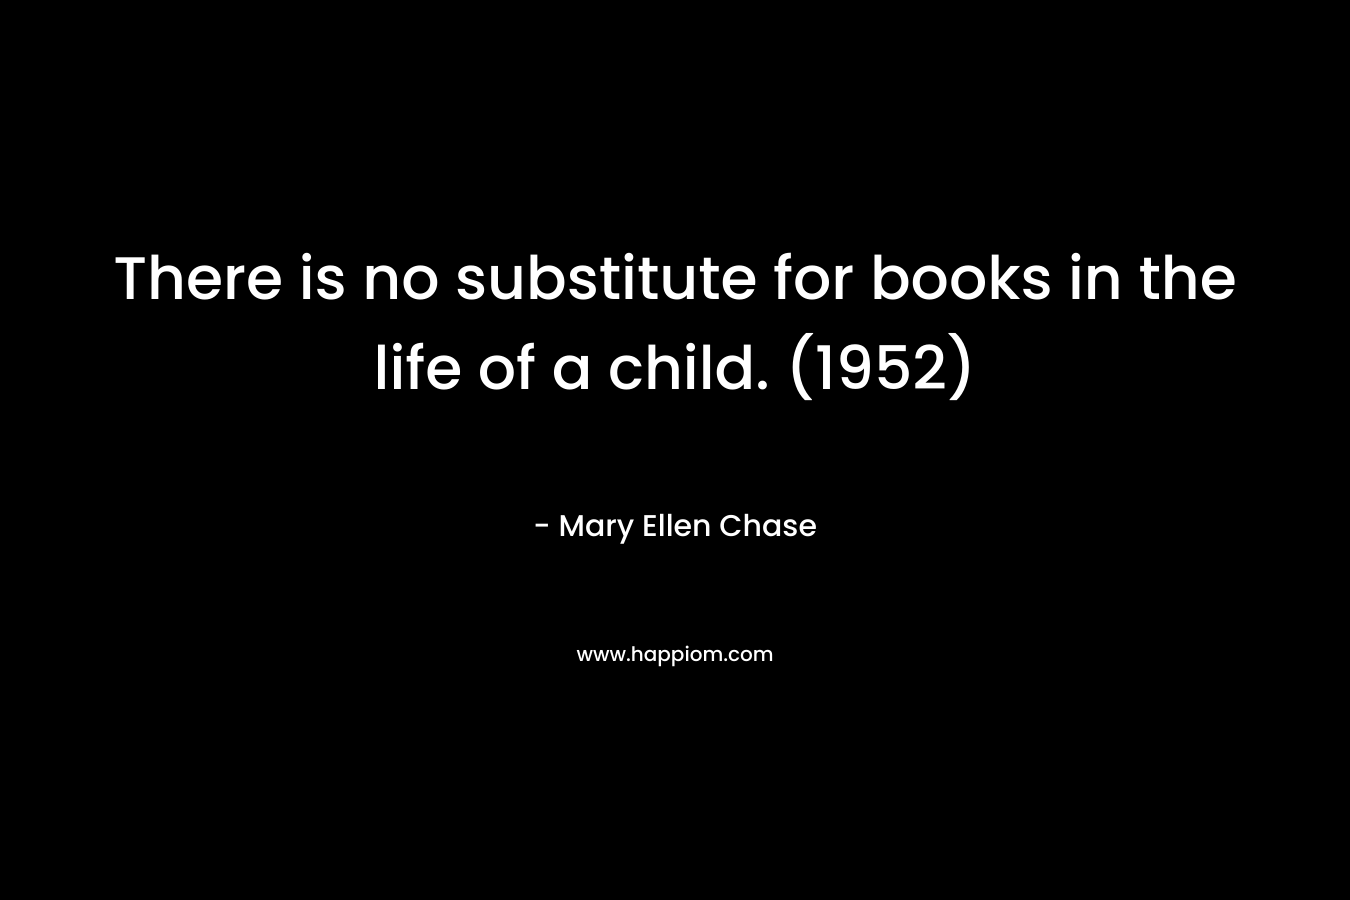 There is no substitute for books in the life of a child. (1952) – Mary Ellen Chase